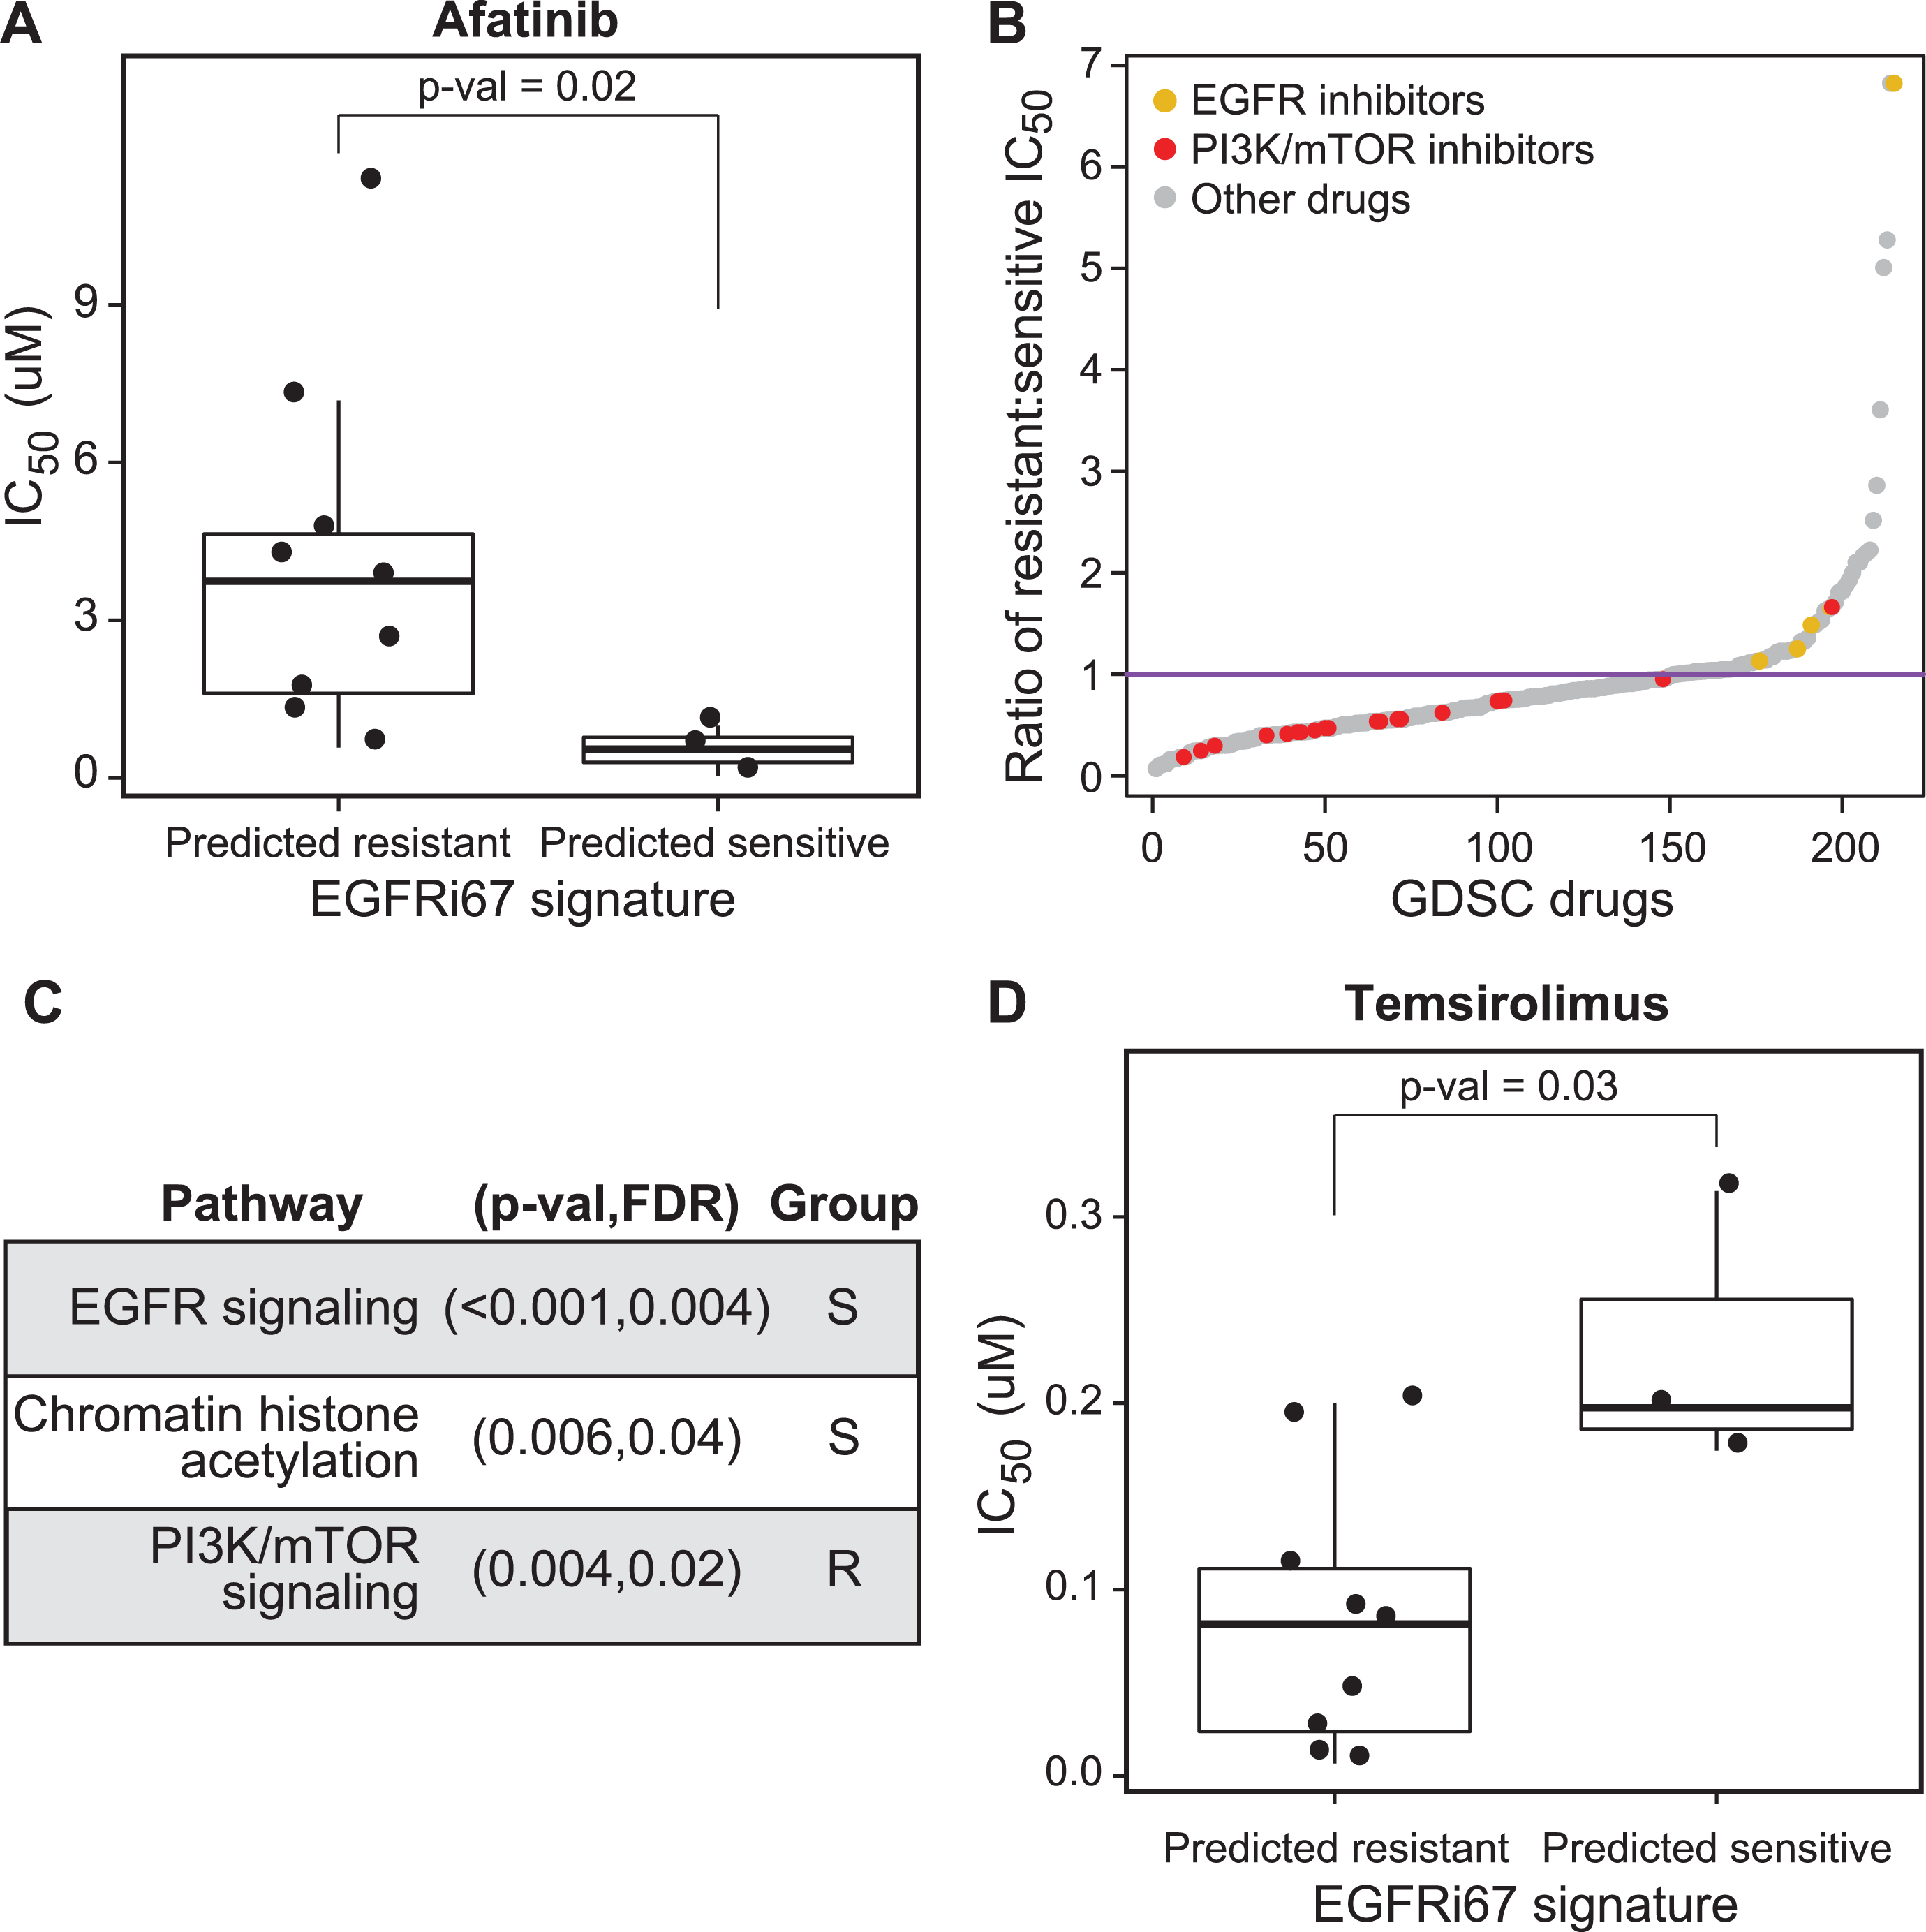 Evaluation of the EGFRi67 gene signature in bladder cancer cell lines from the GDSC. The EGFRi67 was applied to bladder cancer cell lines in the GDSC to predict sensitivity or resistance to EGFR inhibition. (A) The IC50 of afatinib is plotted according to EGFRi67 prediction (p = 0.02, Wilcoxon rank sum test). (B) The median IC50 for each drug was calculated for EGFRi67 sensitive and responsive GDSC cancer cell lines. (C) Enrichment analysis identified drugs targeting three pathways to be statistically significant (FDR <0.05, Kolmogorov Smirnov test). Whether the pathway targeted by the drug was more effective in the EGFRi67 sensitive (S) or resistant (R) cell lines is indicated. (D) The IC50 of temsirolimus is plotted according to EGFRi67 prediction (p = 0.03, Wilcoxon rank sum test).